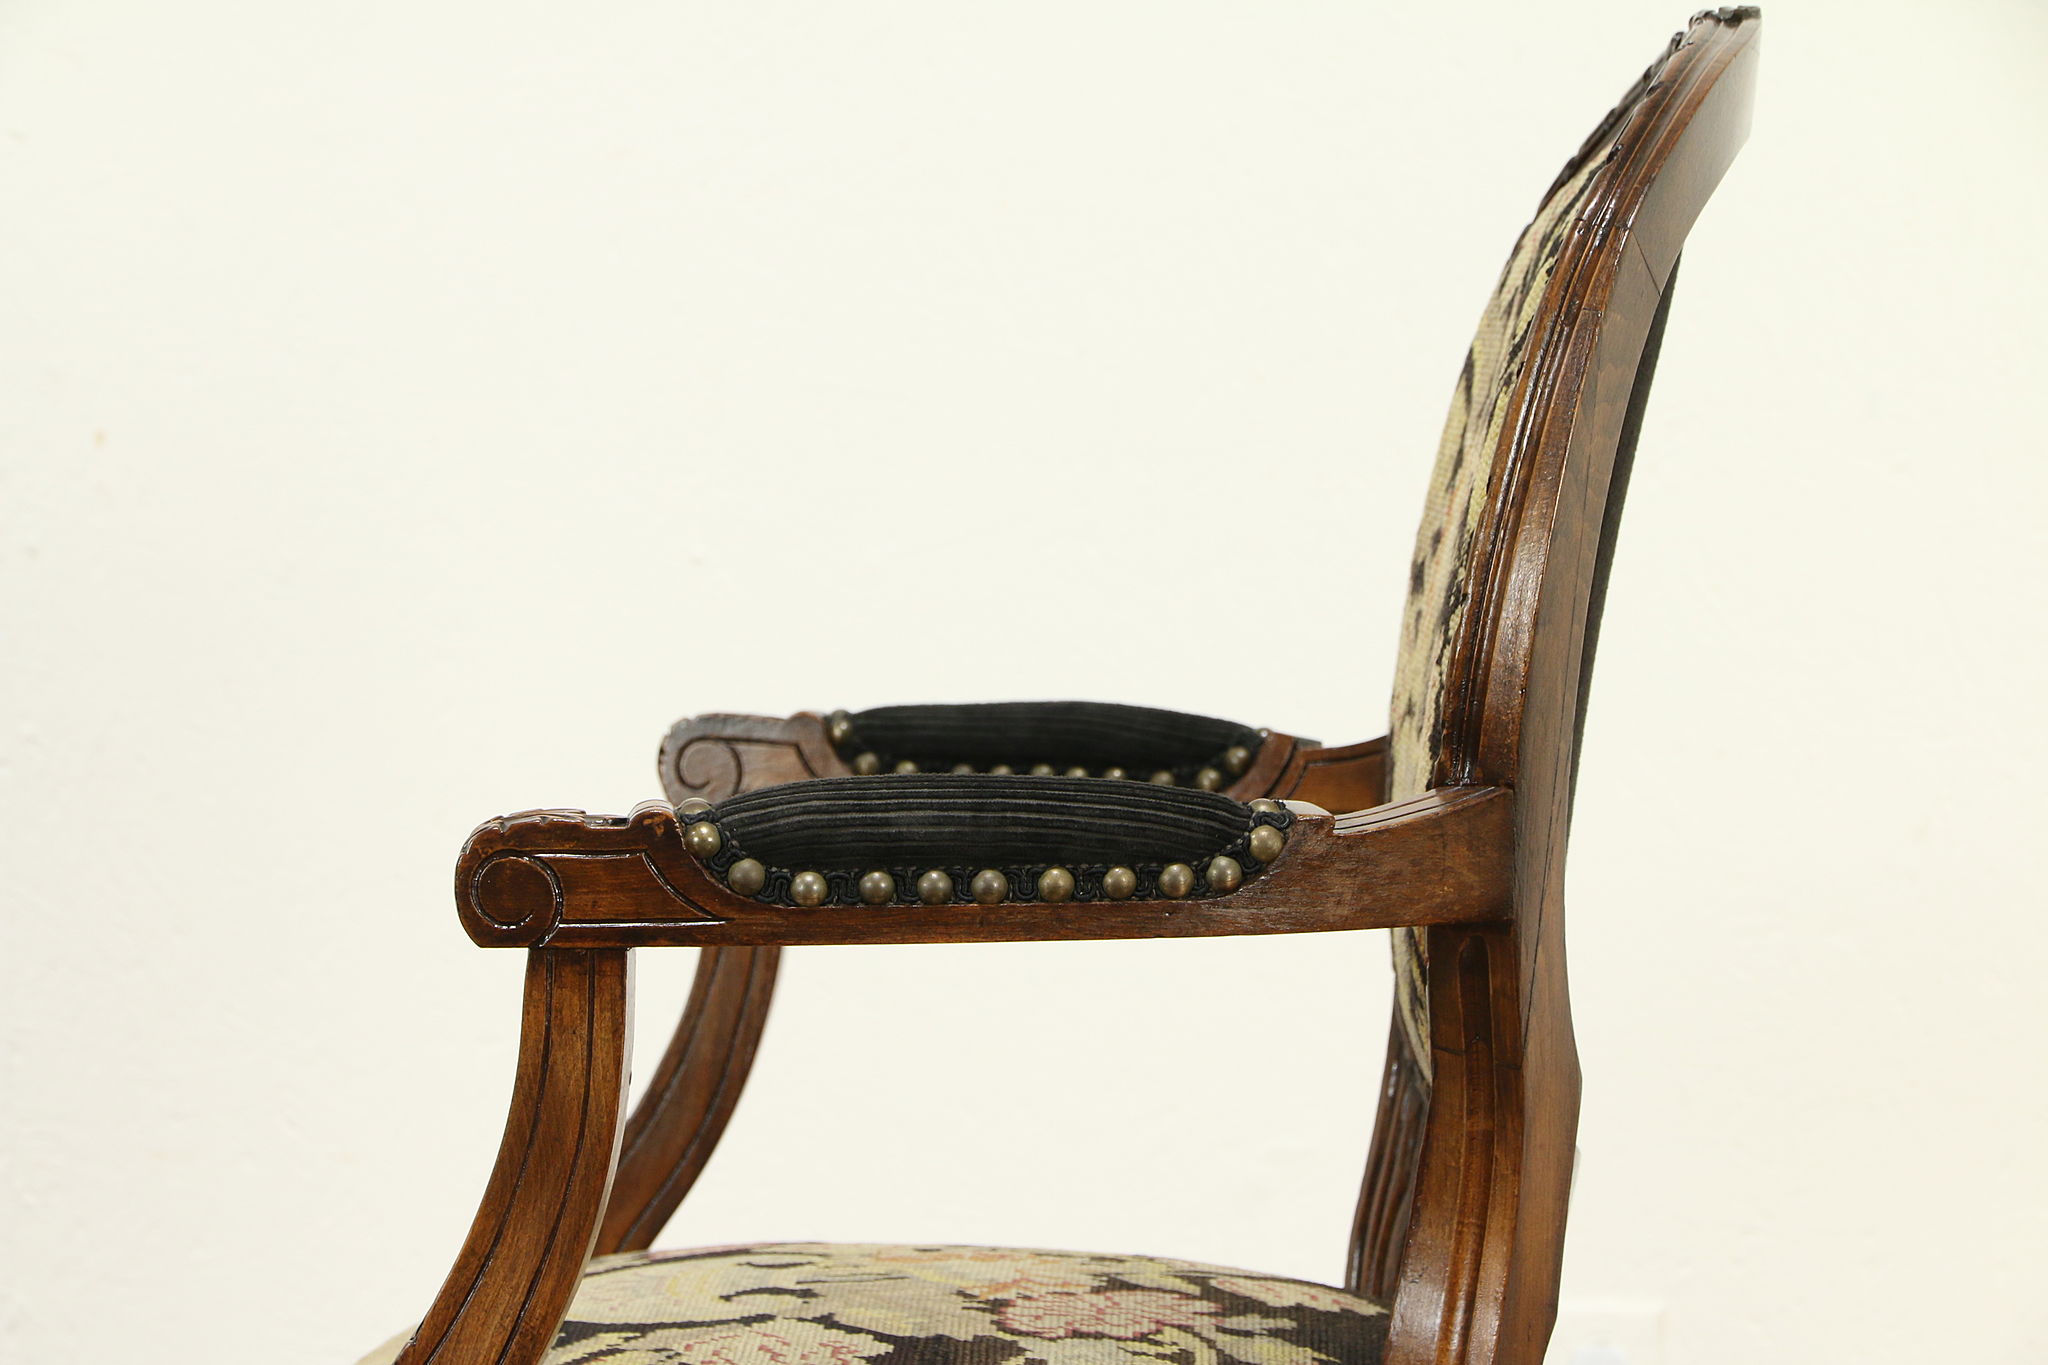 Louis XVI style chair black satin fabric with peas, tassel and